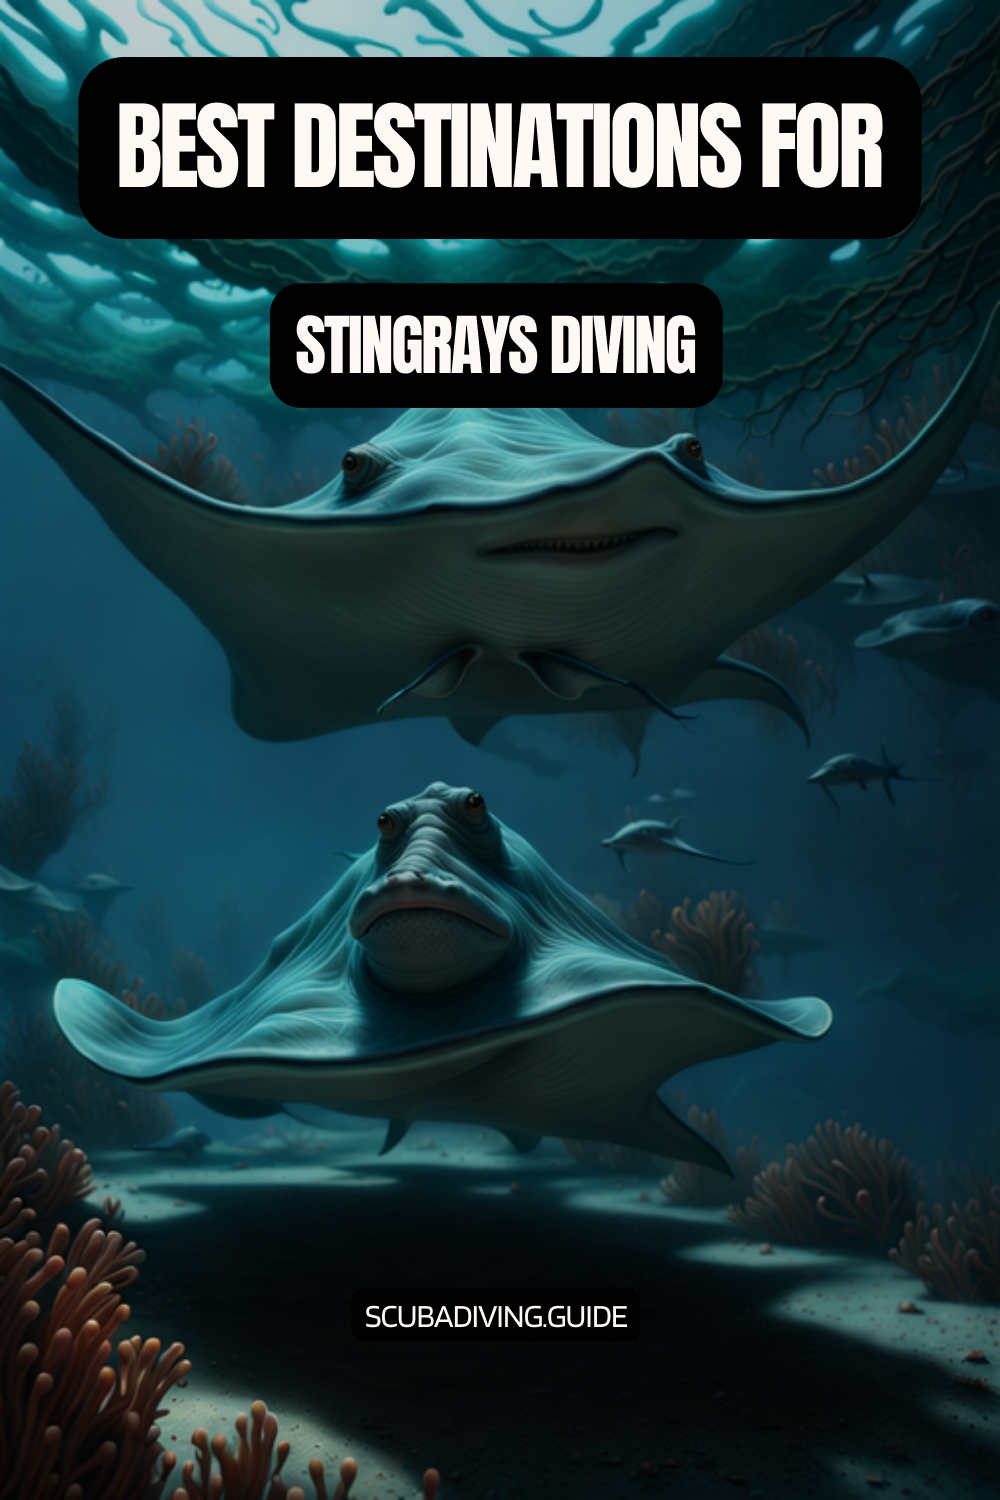 Best Destinations for Diving with Stingrays